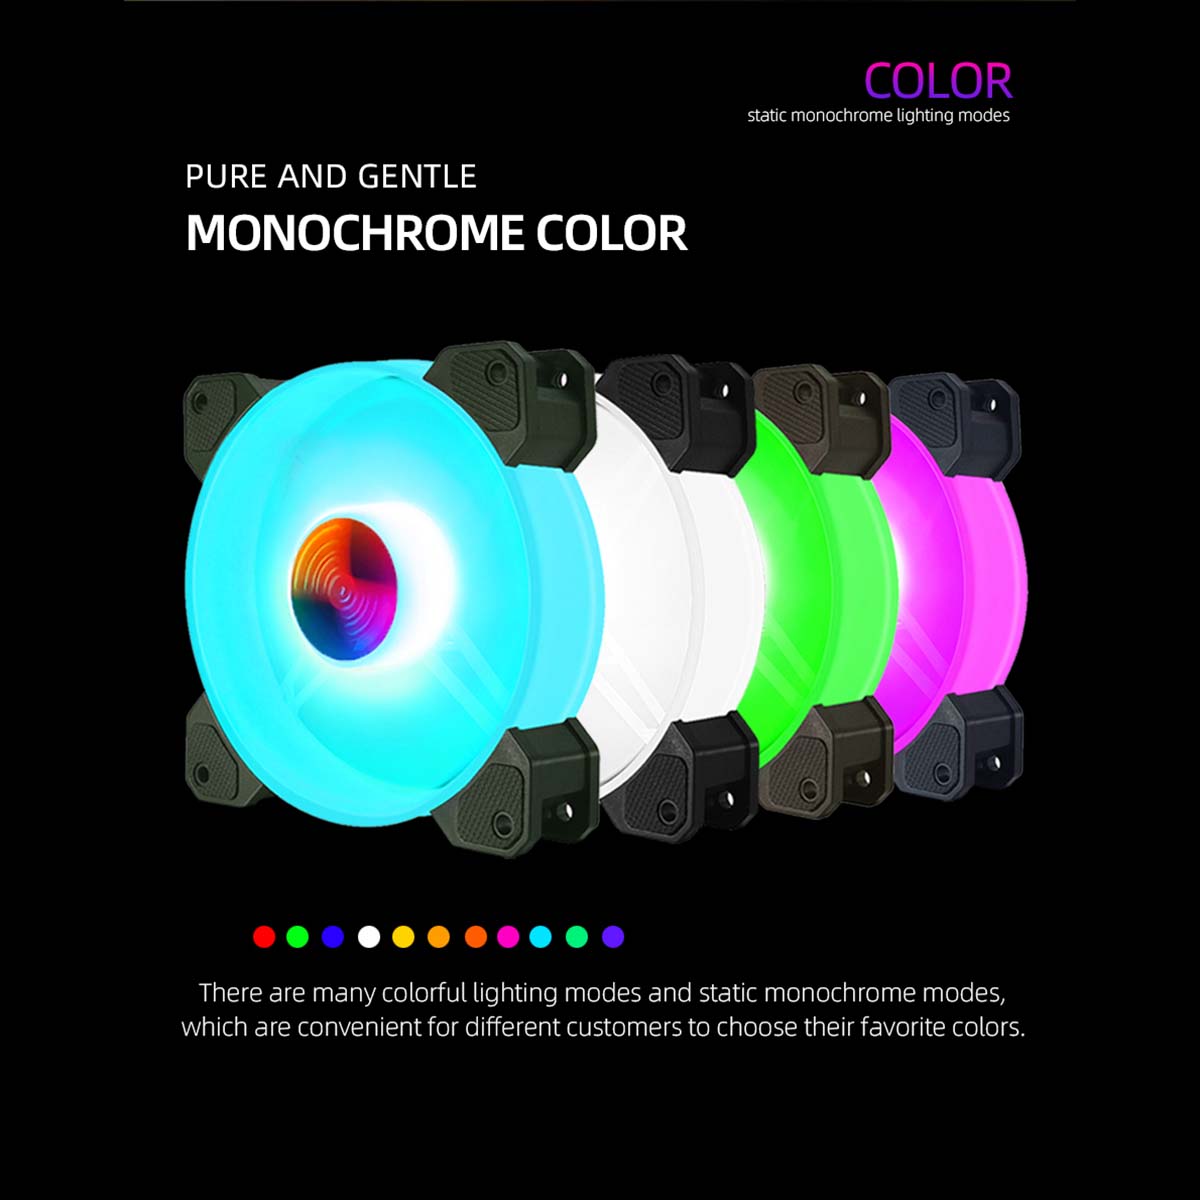 COOLMOON-120mm-Cooling-Fan-RGB-6PIN-Computer-Case-Colorful-Radiator-Cooler-PC-5V-DC-1948240-8